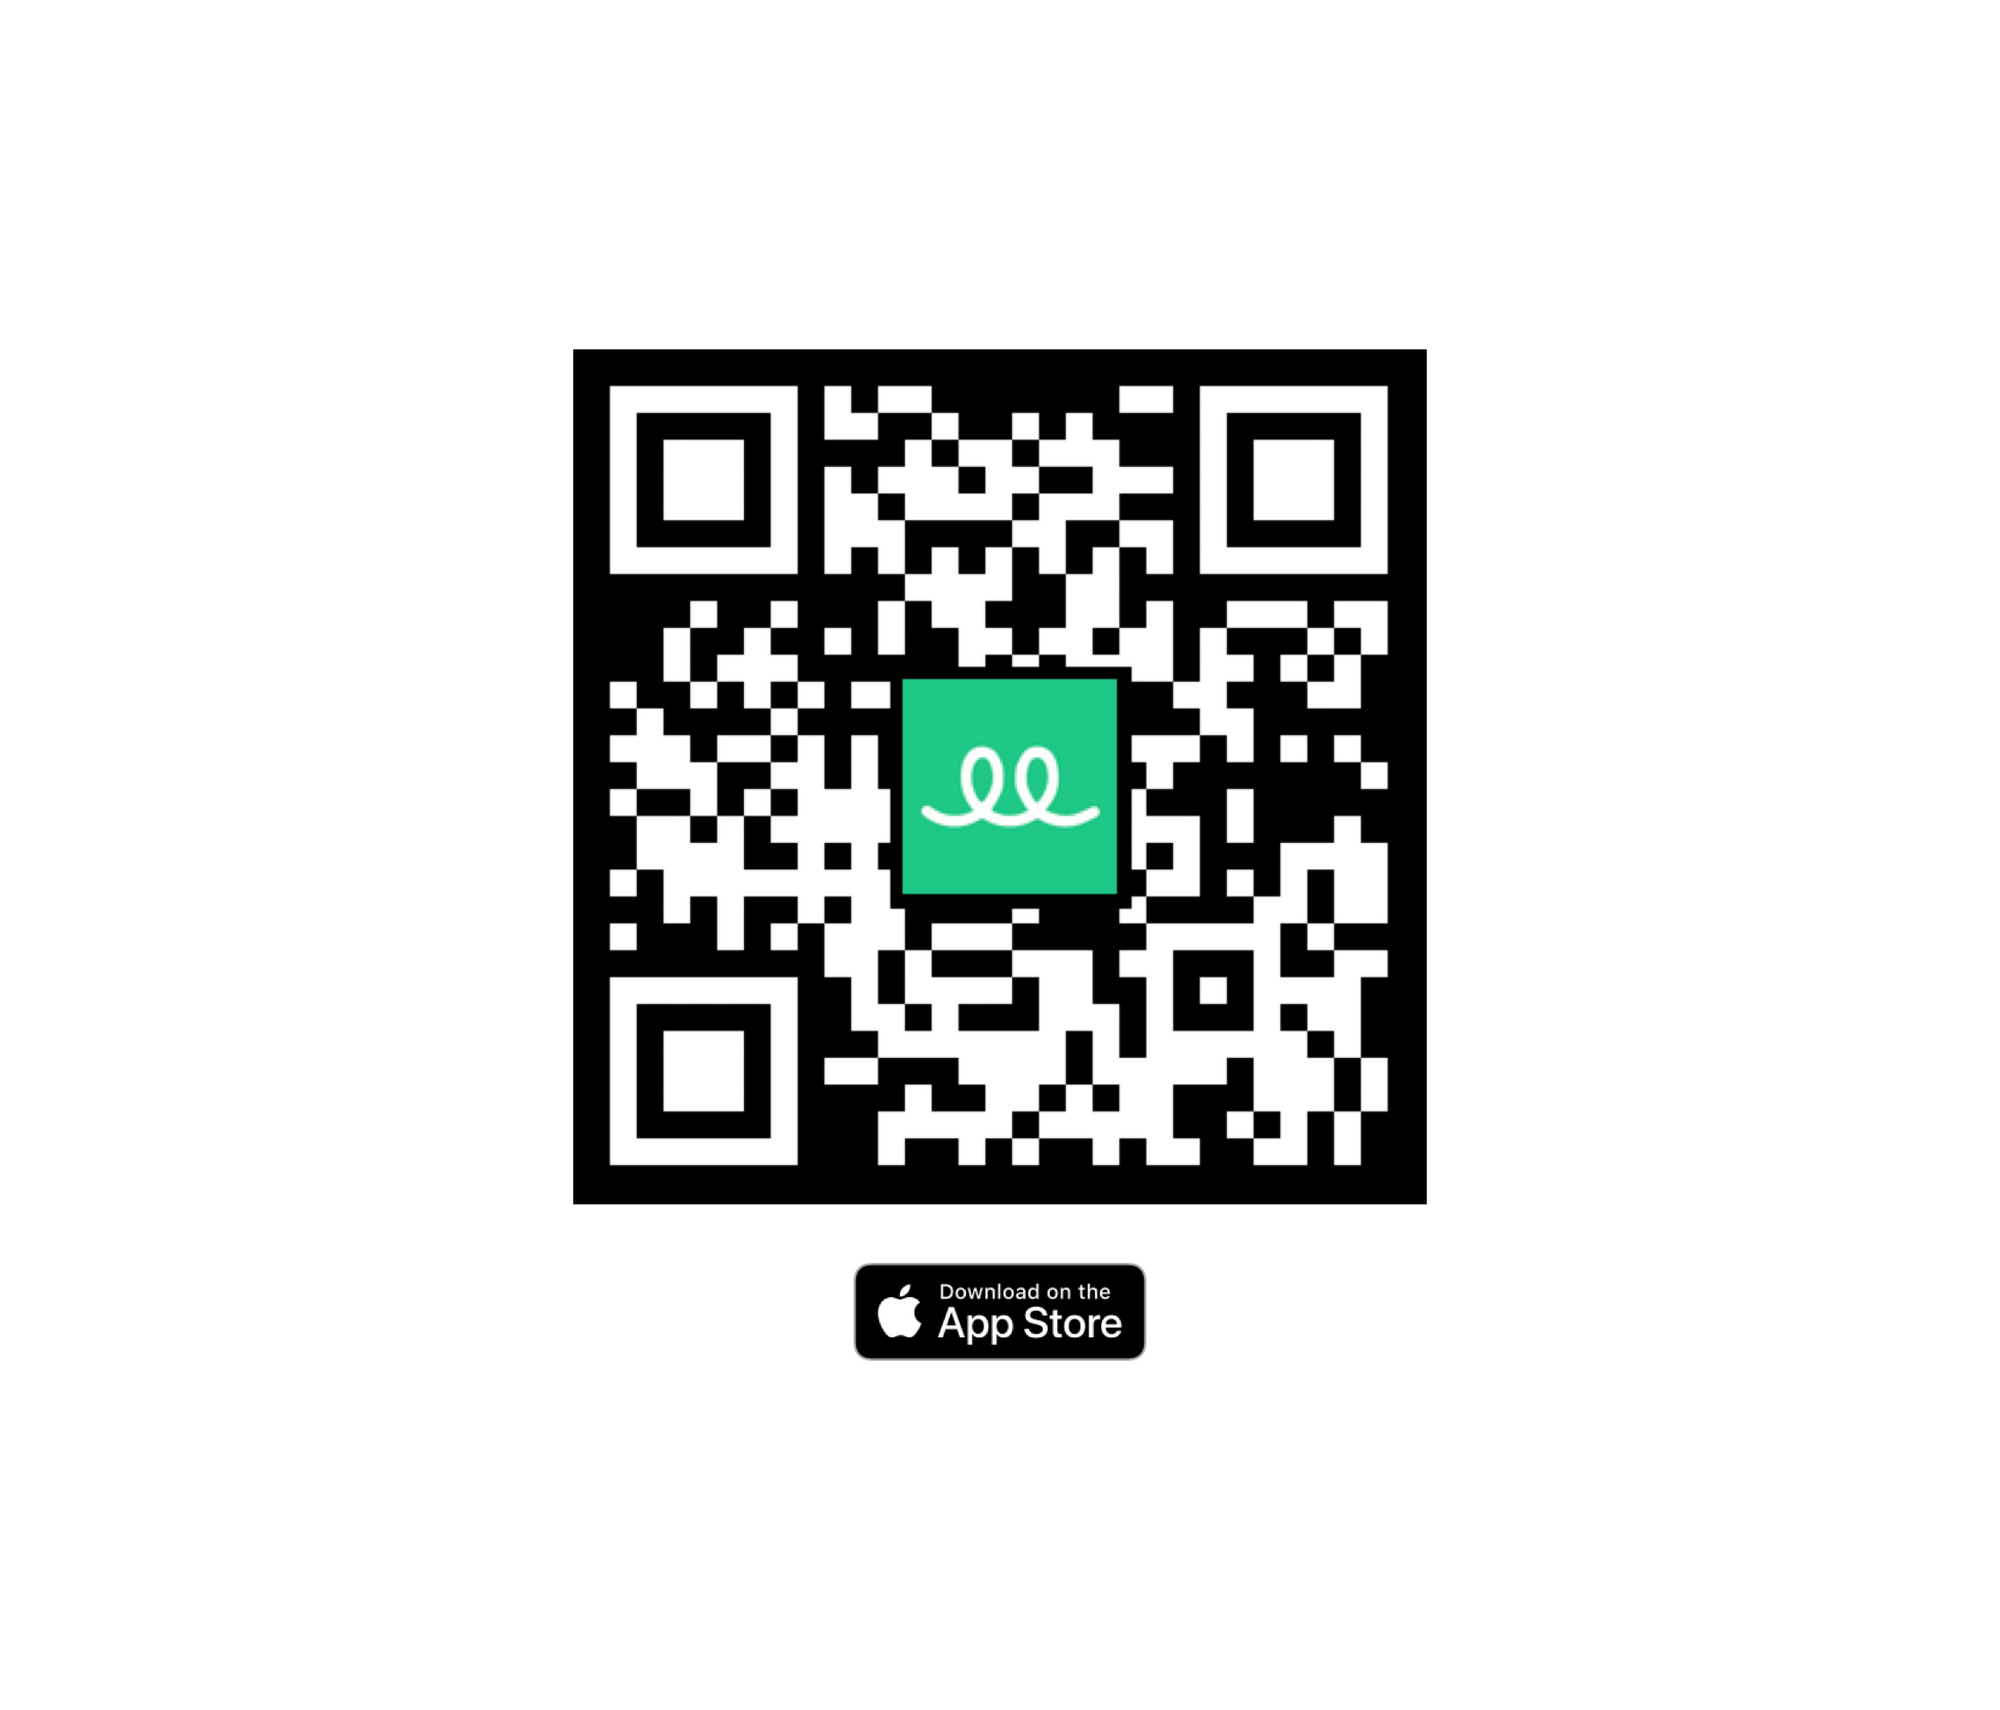 QR code to download the SoonCall app on App Store